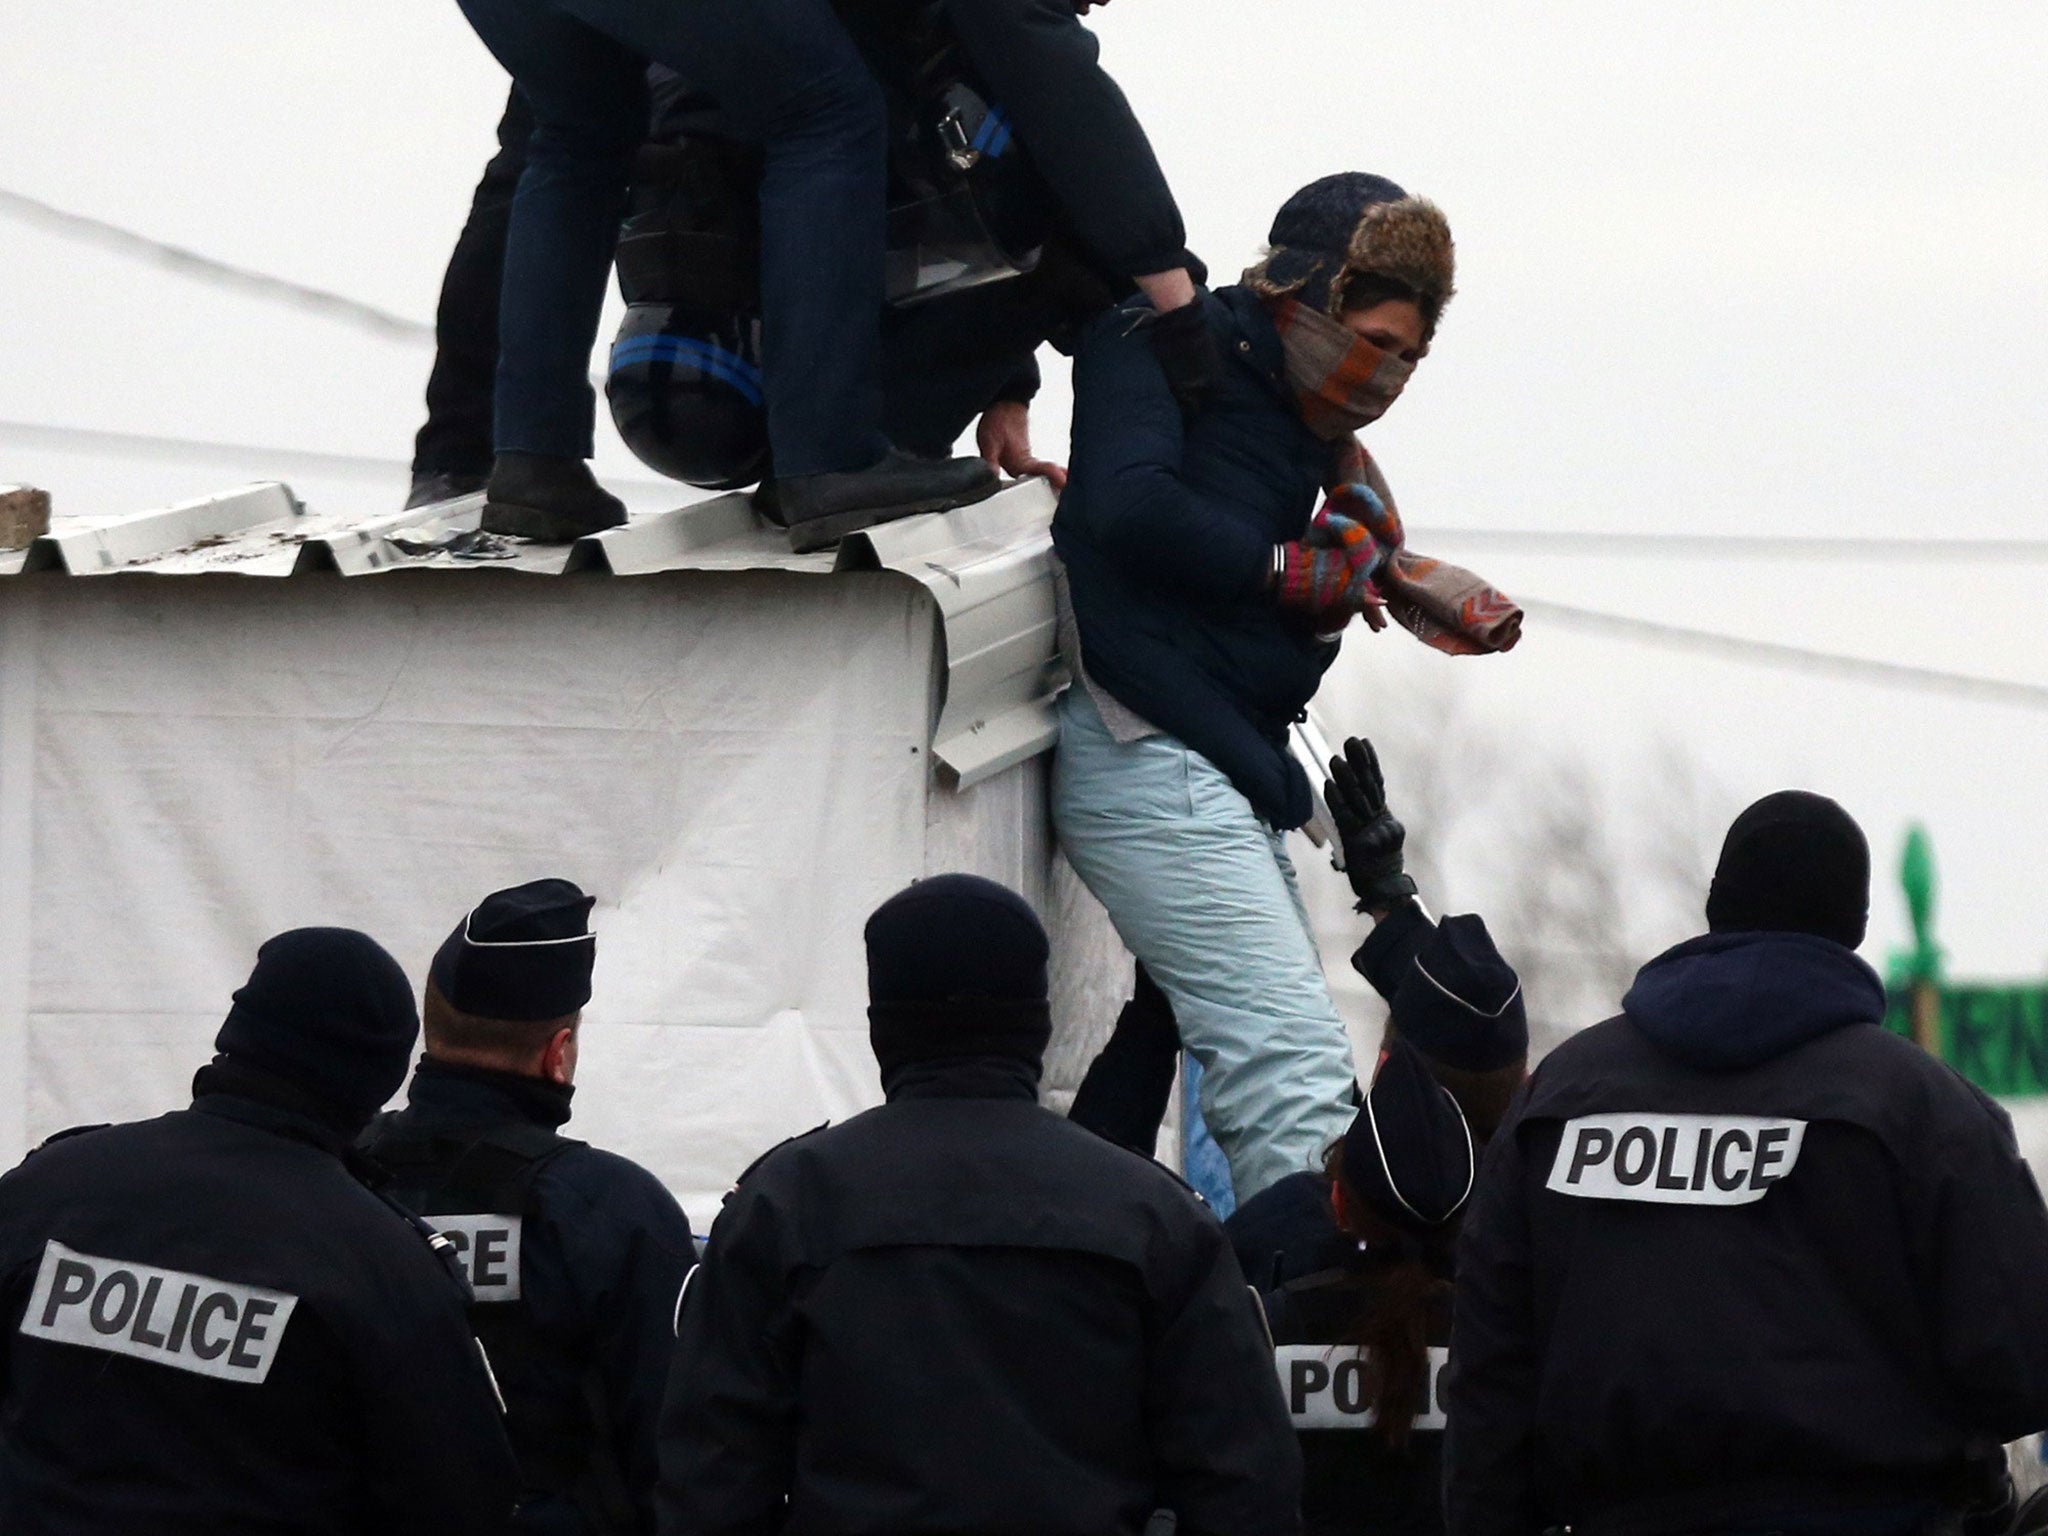 Police detain a woman who had threatened to cut her wrist as she was removed from the roof of a hut as they cleared the "jungle" migrant camp on March 01, 2016 in Calais, France.